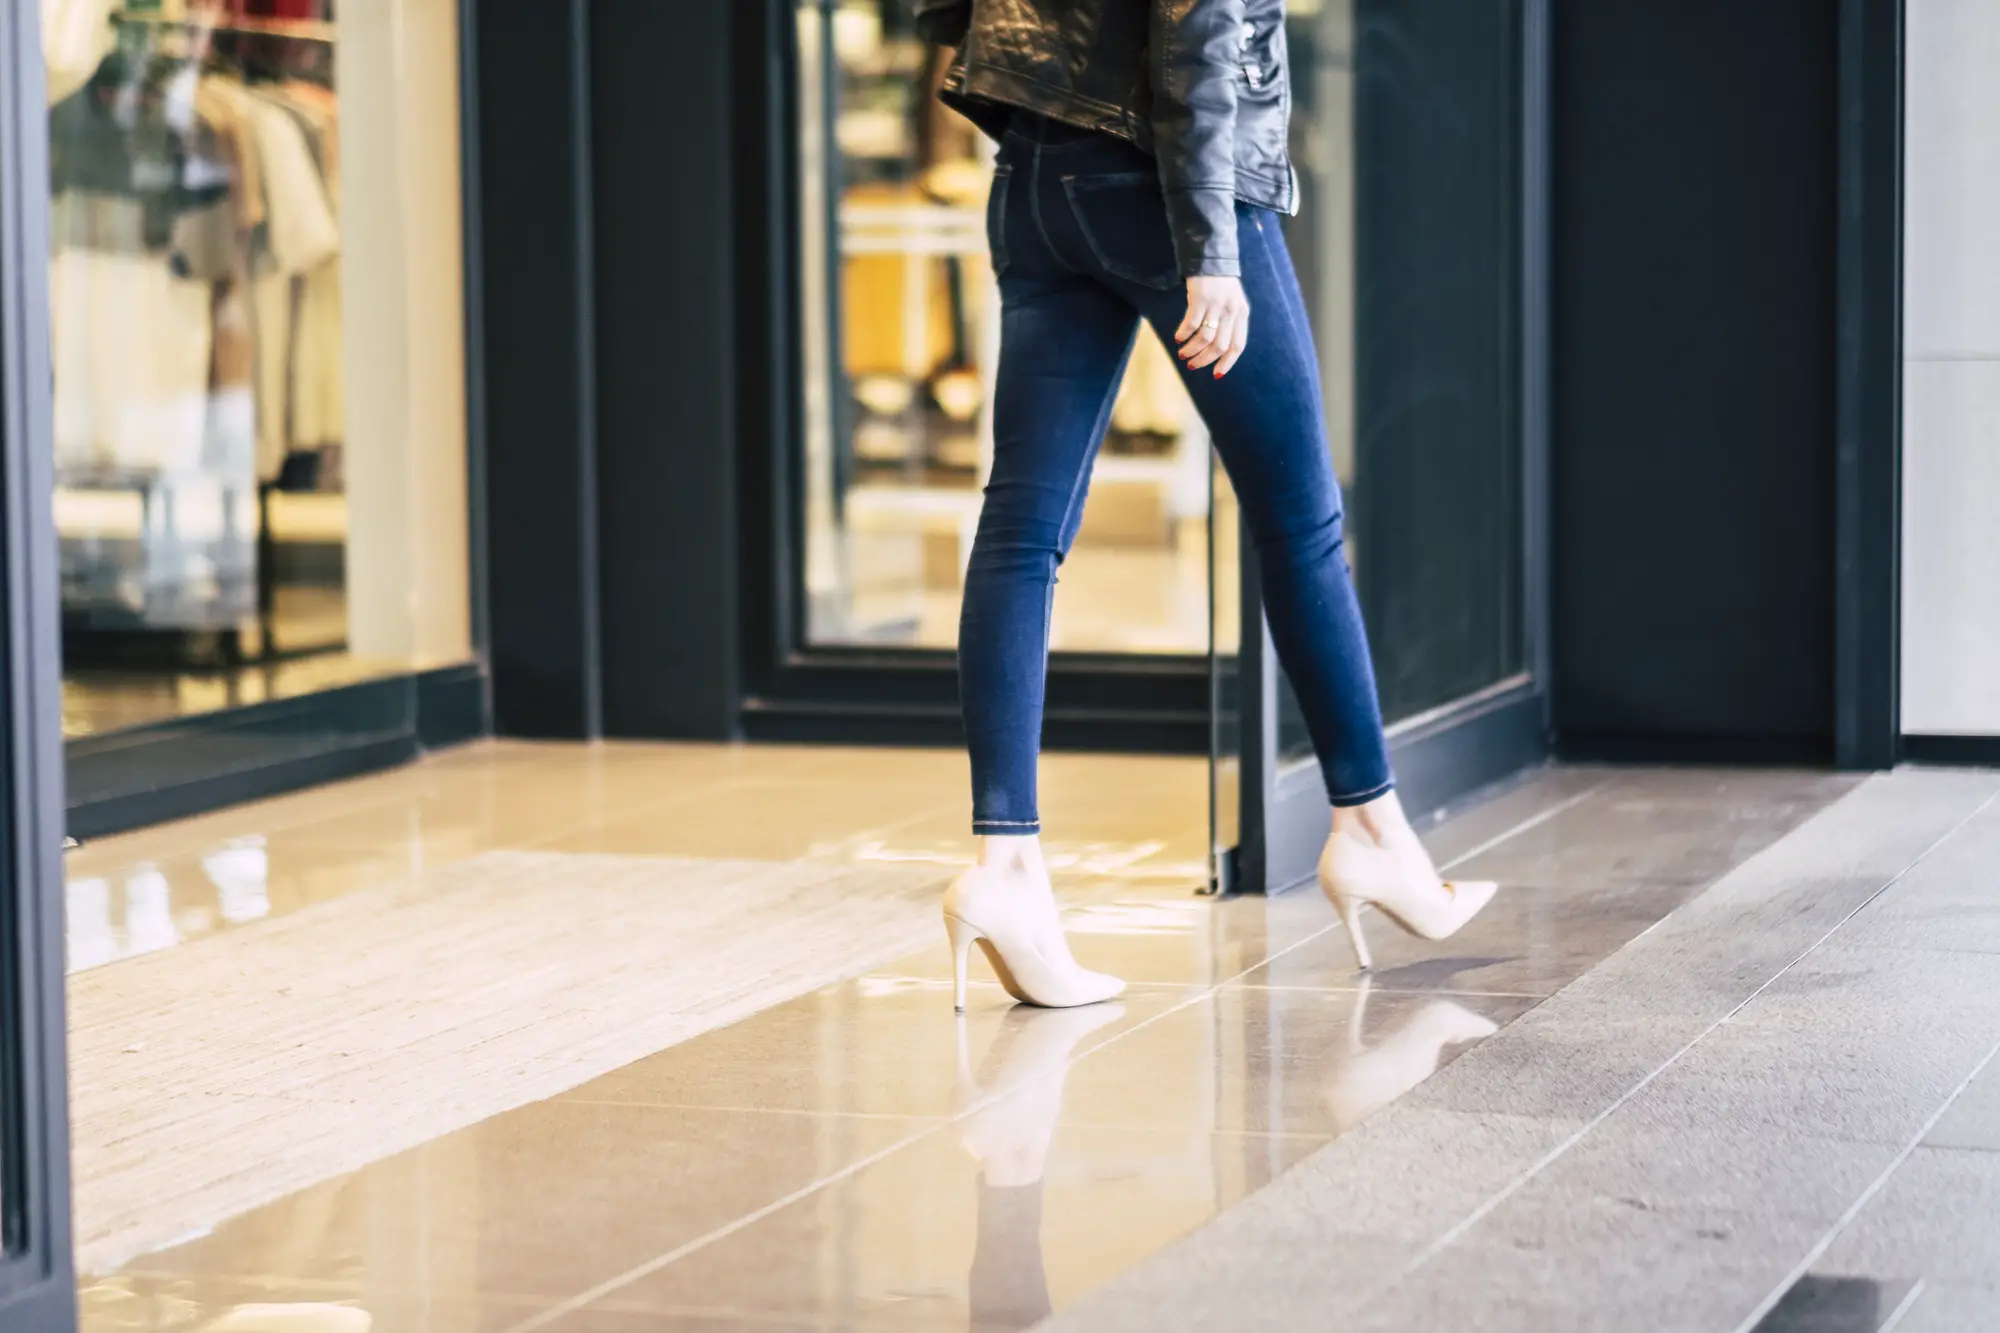 Fashion woman walking in stretch skinny jeans outside a store after shopping activity